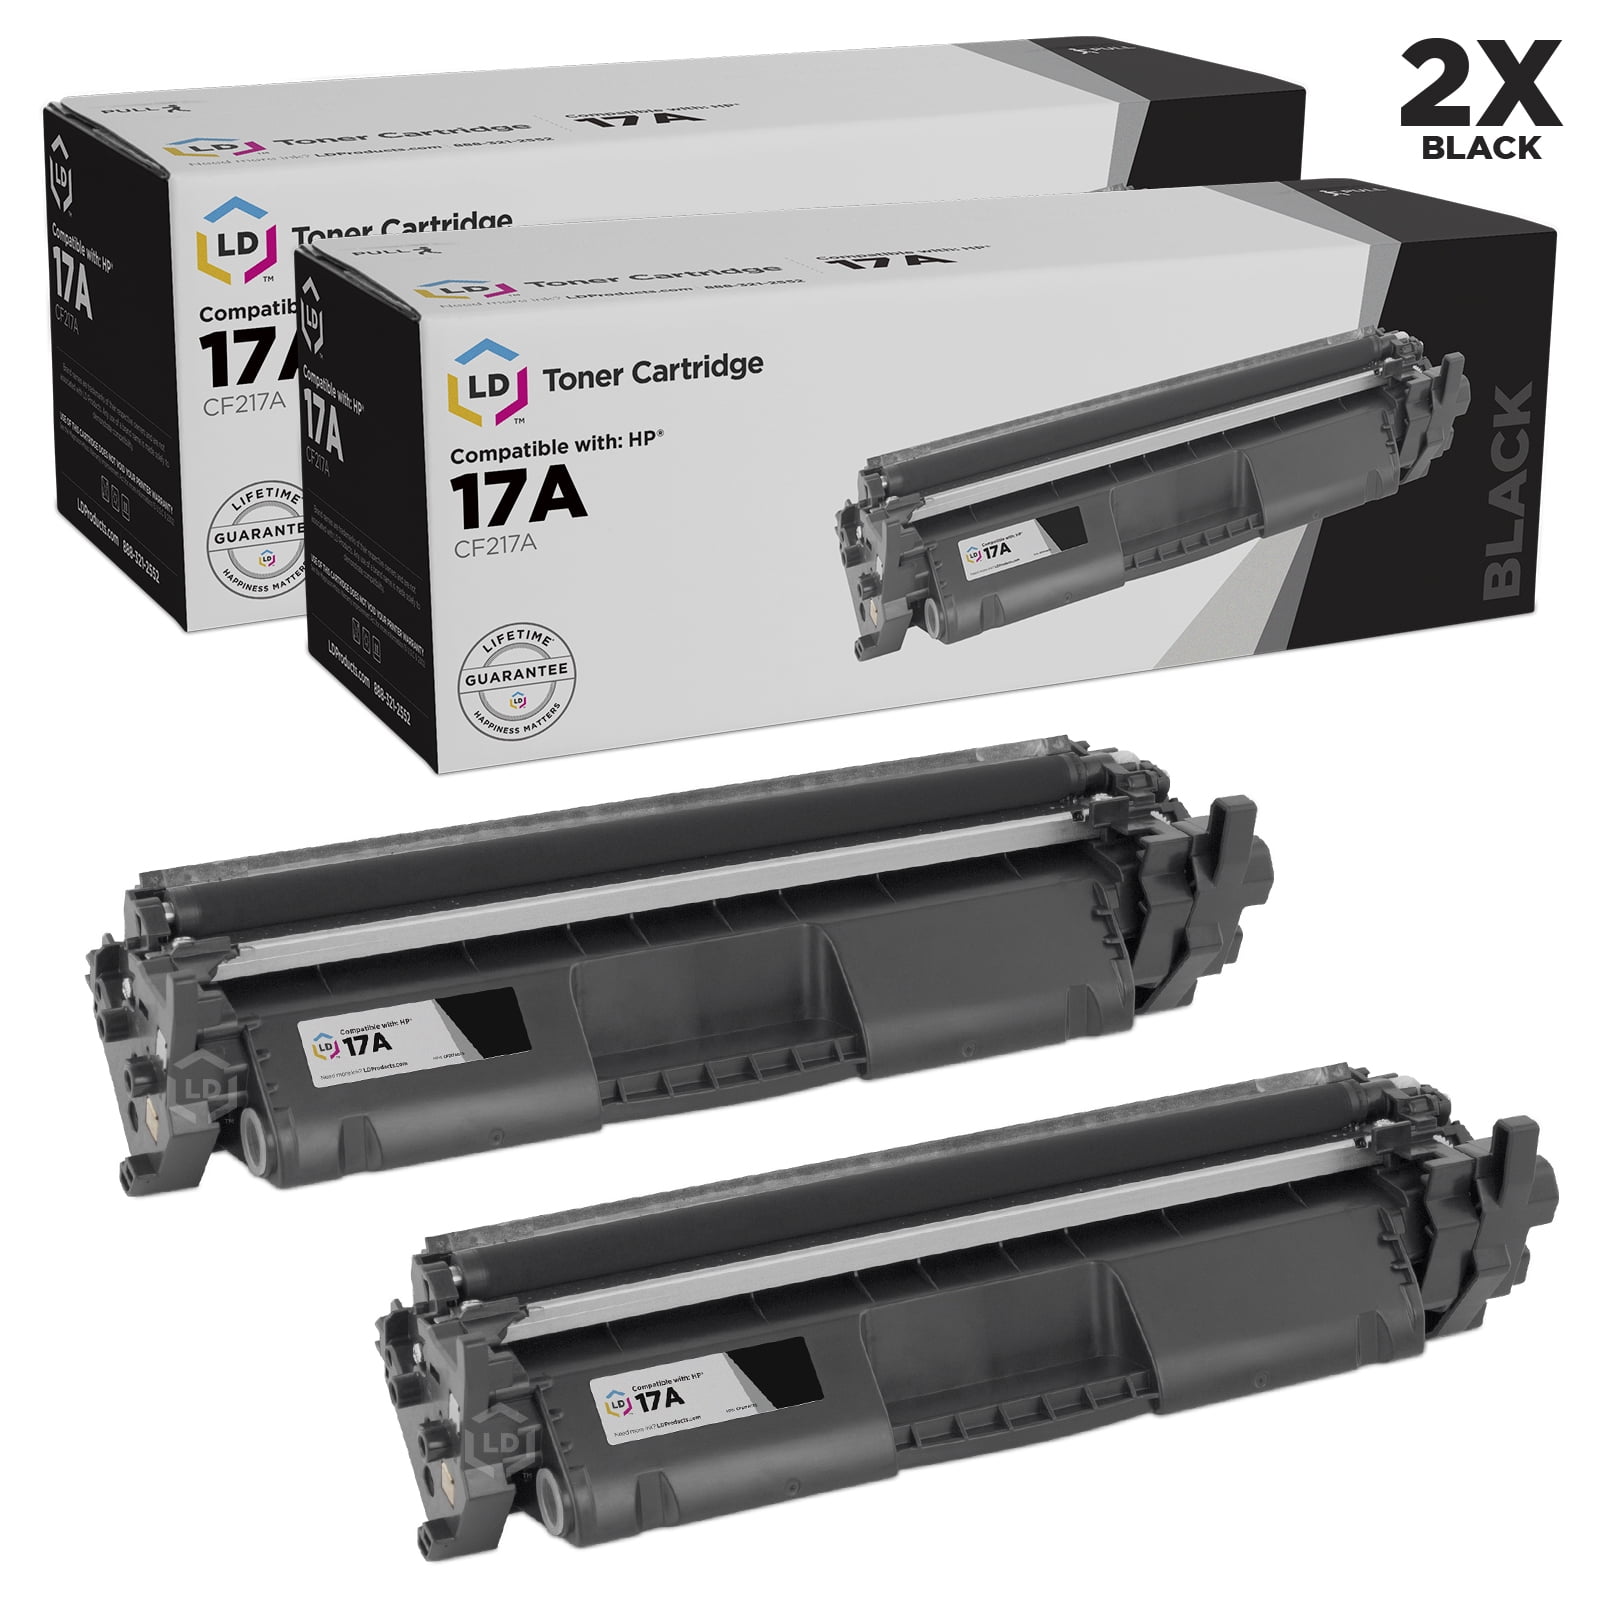 use for HP Laserjet Pro M102 M102w Color4work Compatible Toner Cartridge Replacement for HP 17A CF217A Black MFP M130 M130fn M130fw M130fn Printer 2-Pack 